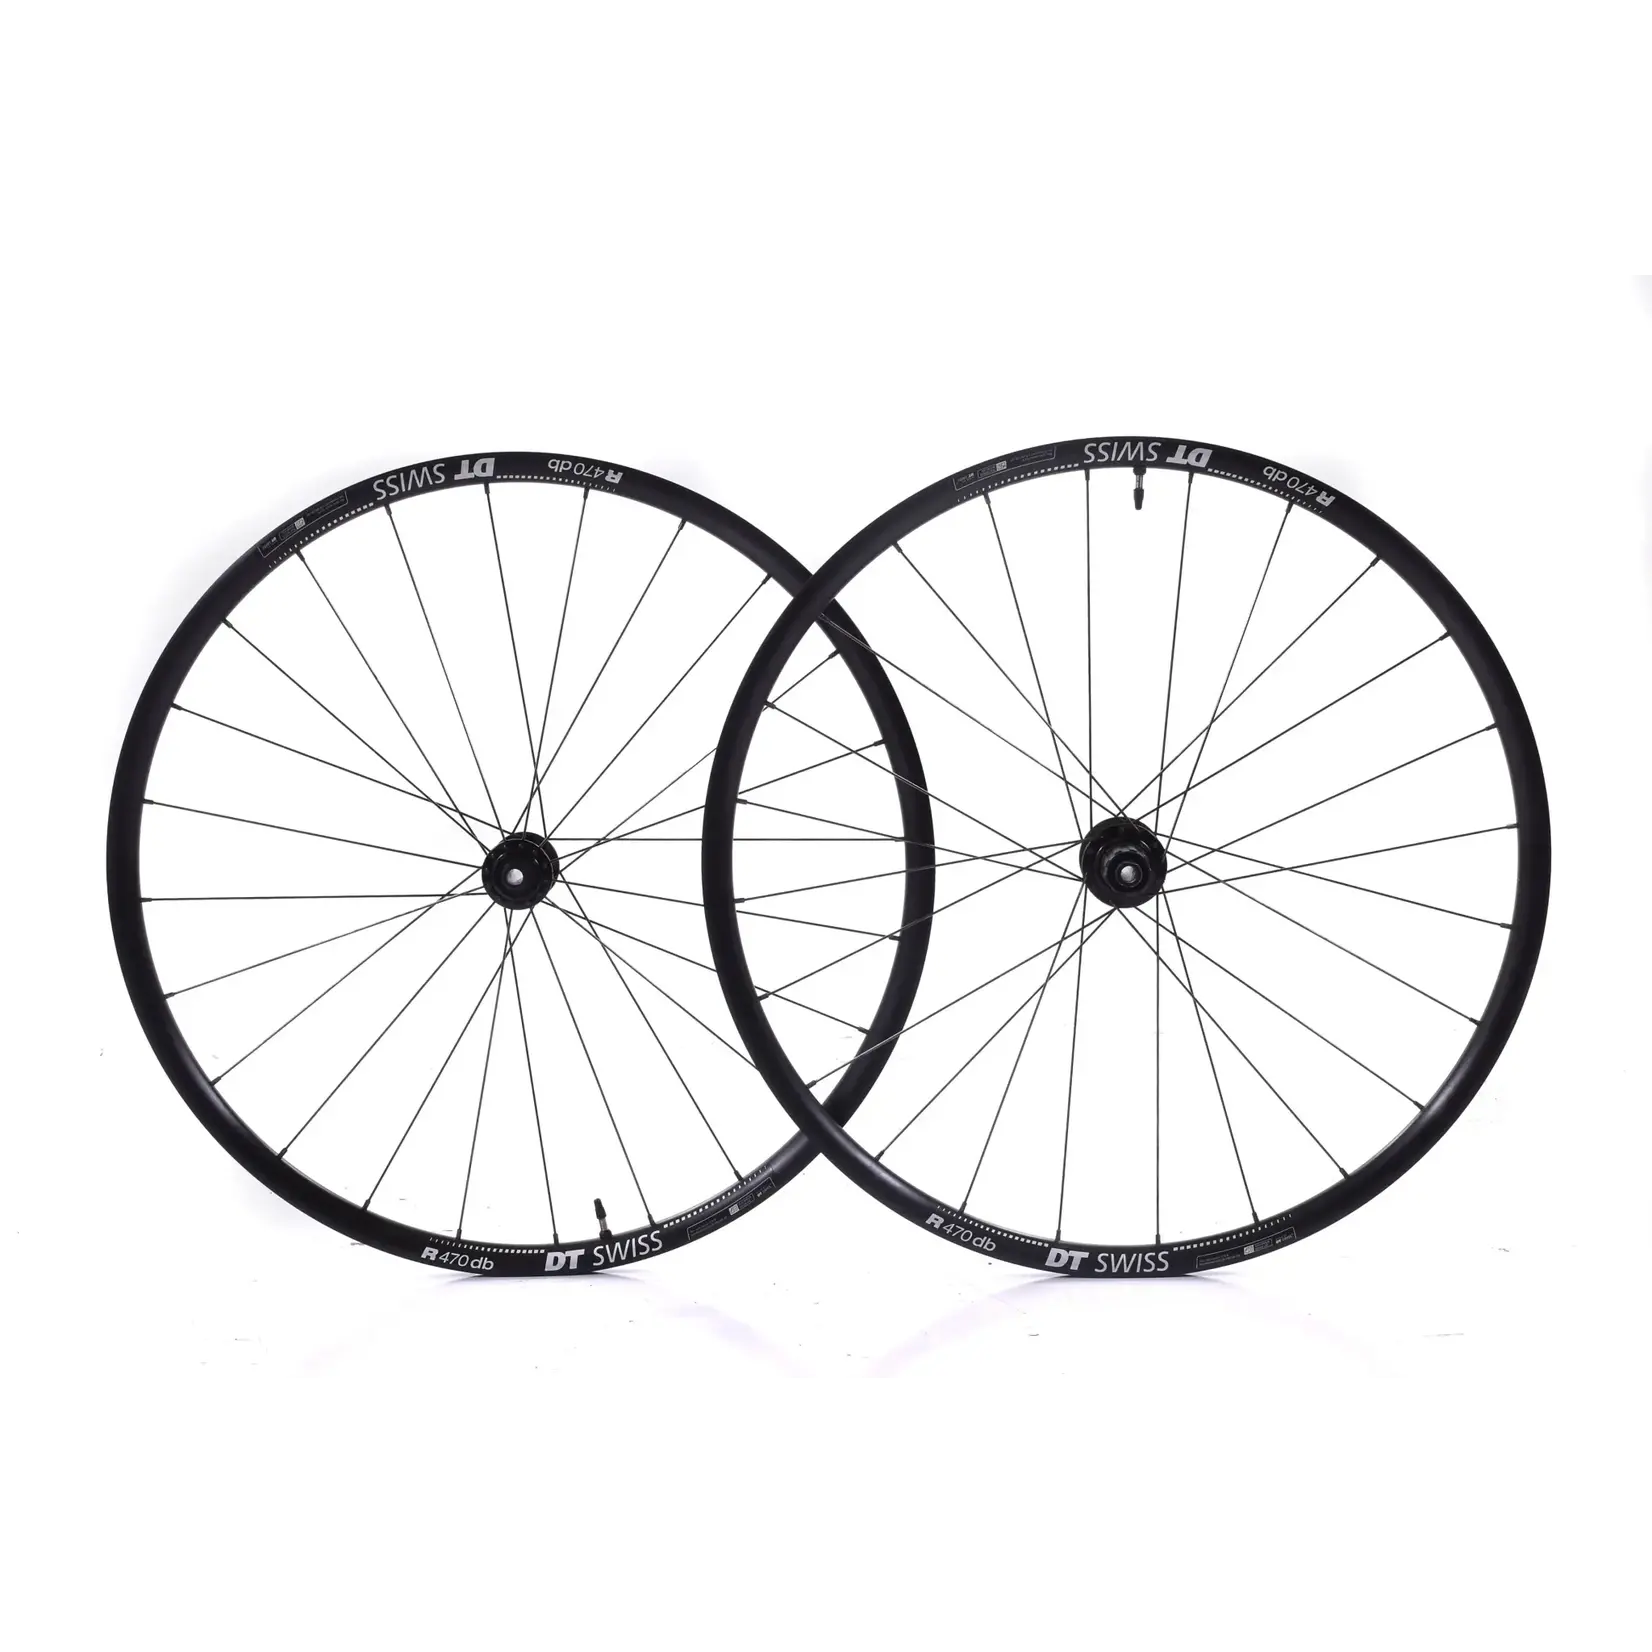 Specialized Creo DT SWISS R470 boost Wheelset Road/Gravel